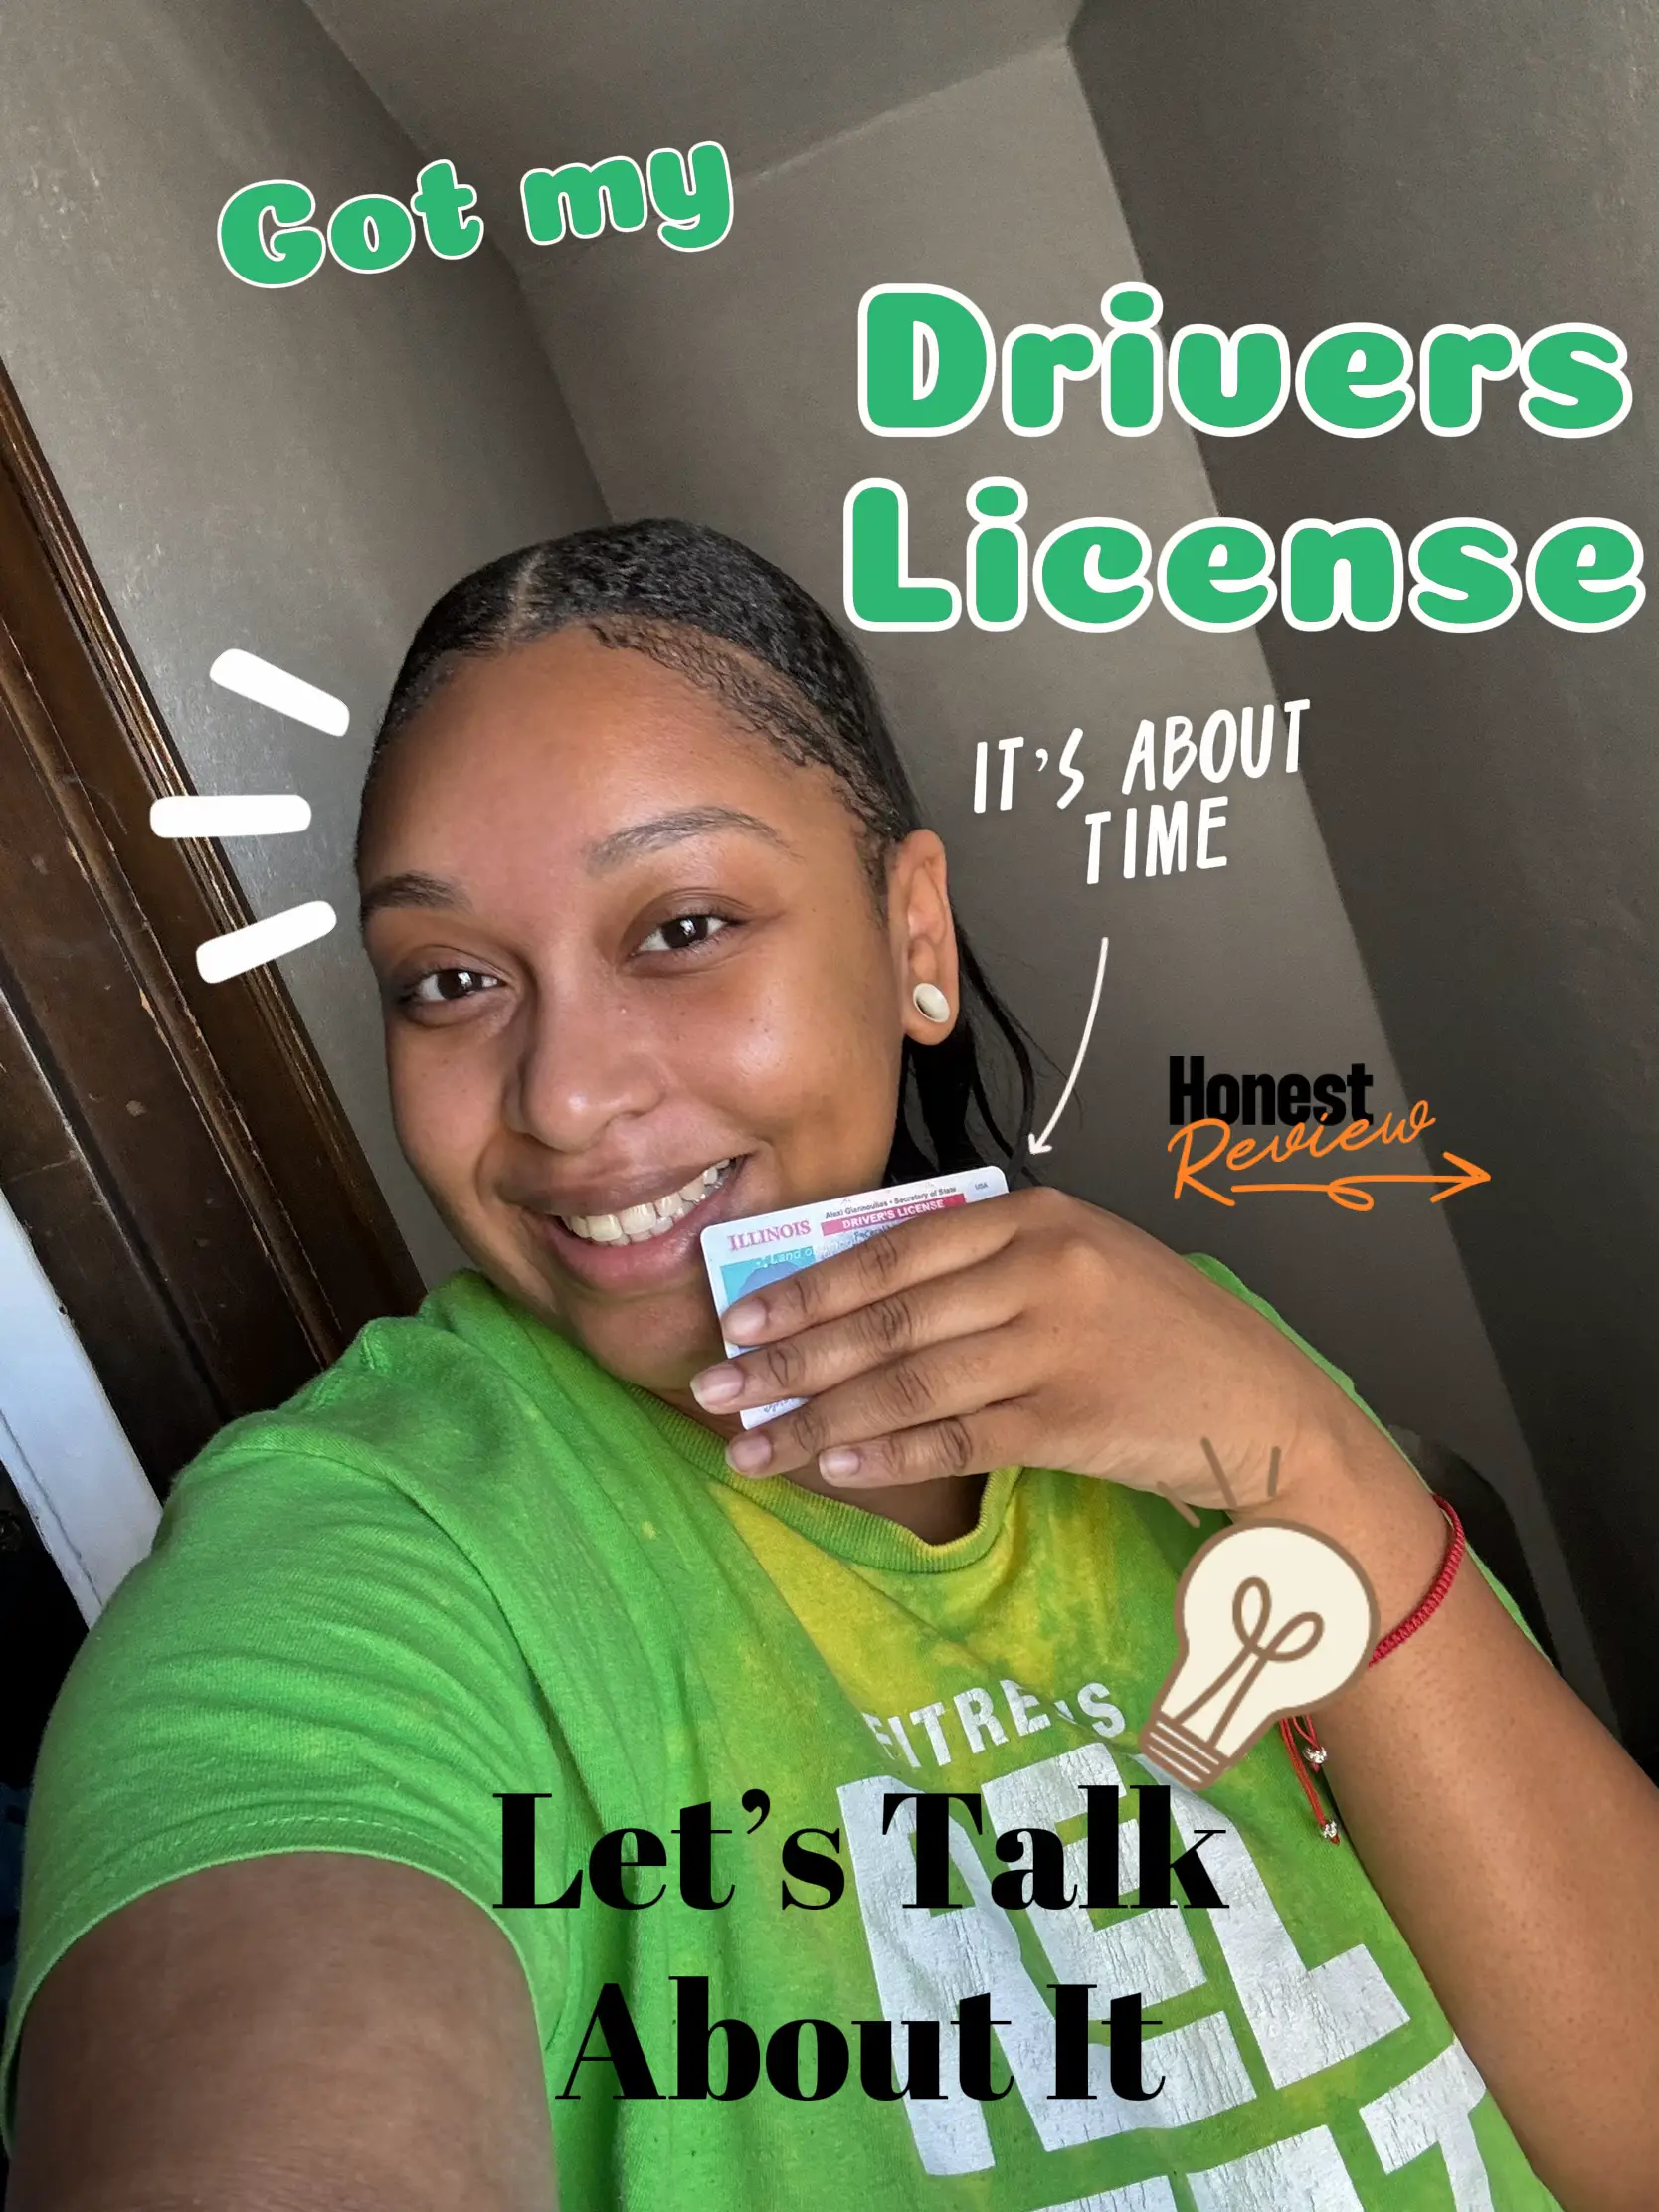  A woman is smiling and holding a drivers license.